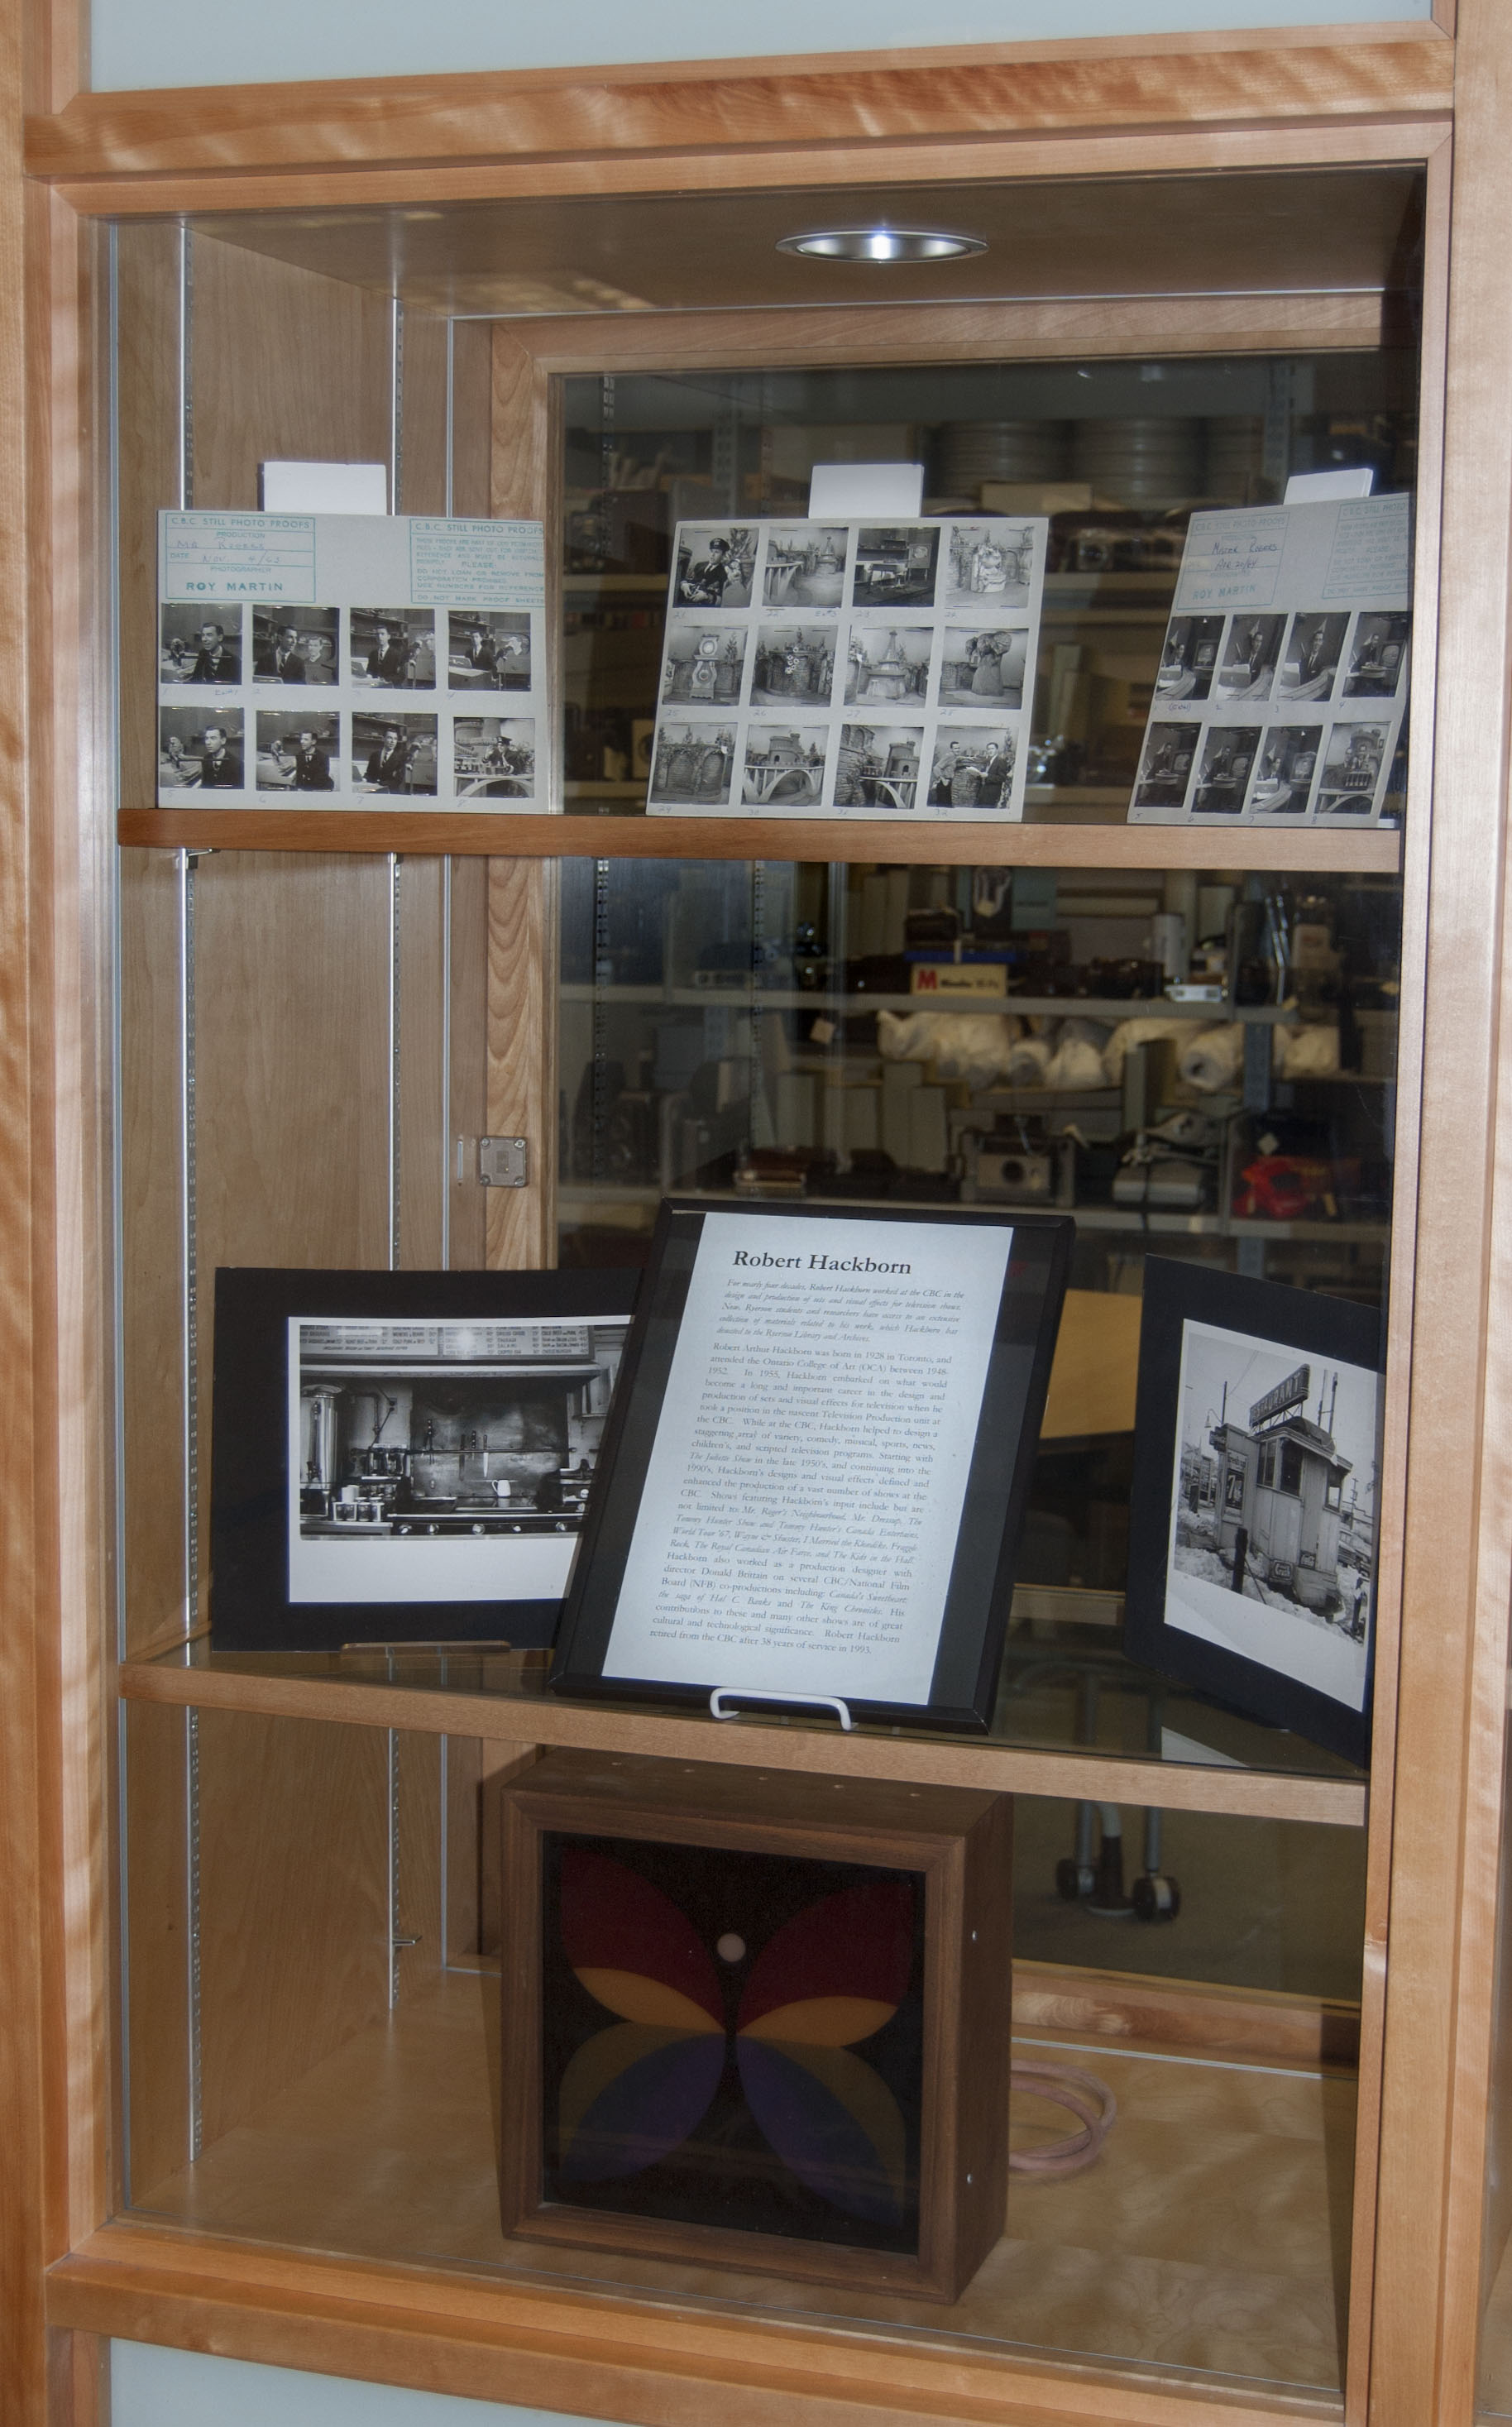 This section of the display shows photographs taken by Hackborn during his career which document the processes of working on a television set.